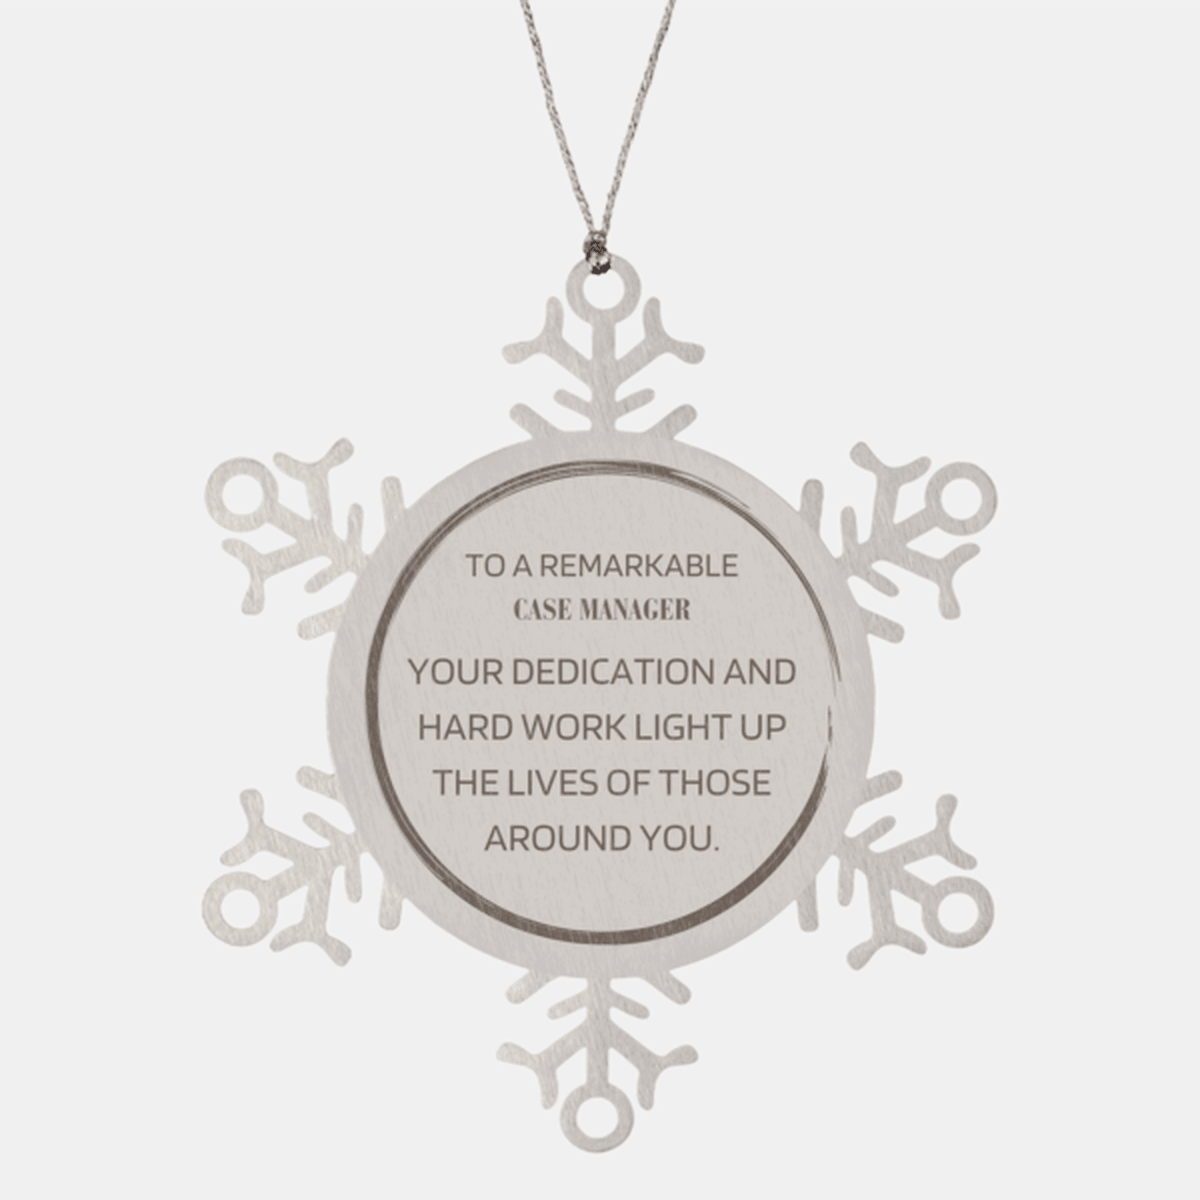 Remarkable Case Manager Gifts, Your dedication and hard work, Inspirational Birthday Christmas Unique Snowflake Ornament For Case Manager, Coworkers, Men, Women, Friends - Mallard Moon Gift Shop